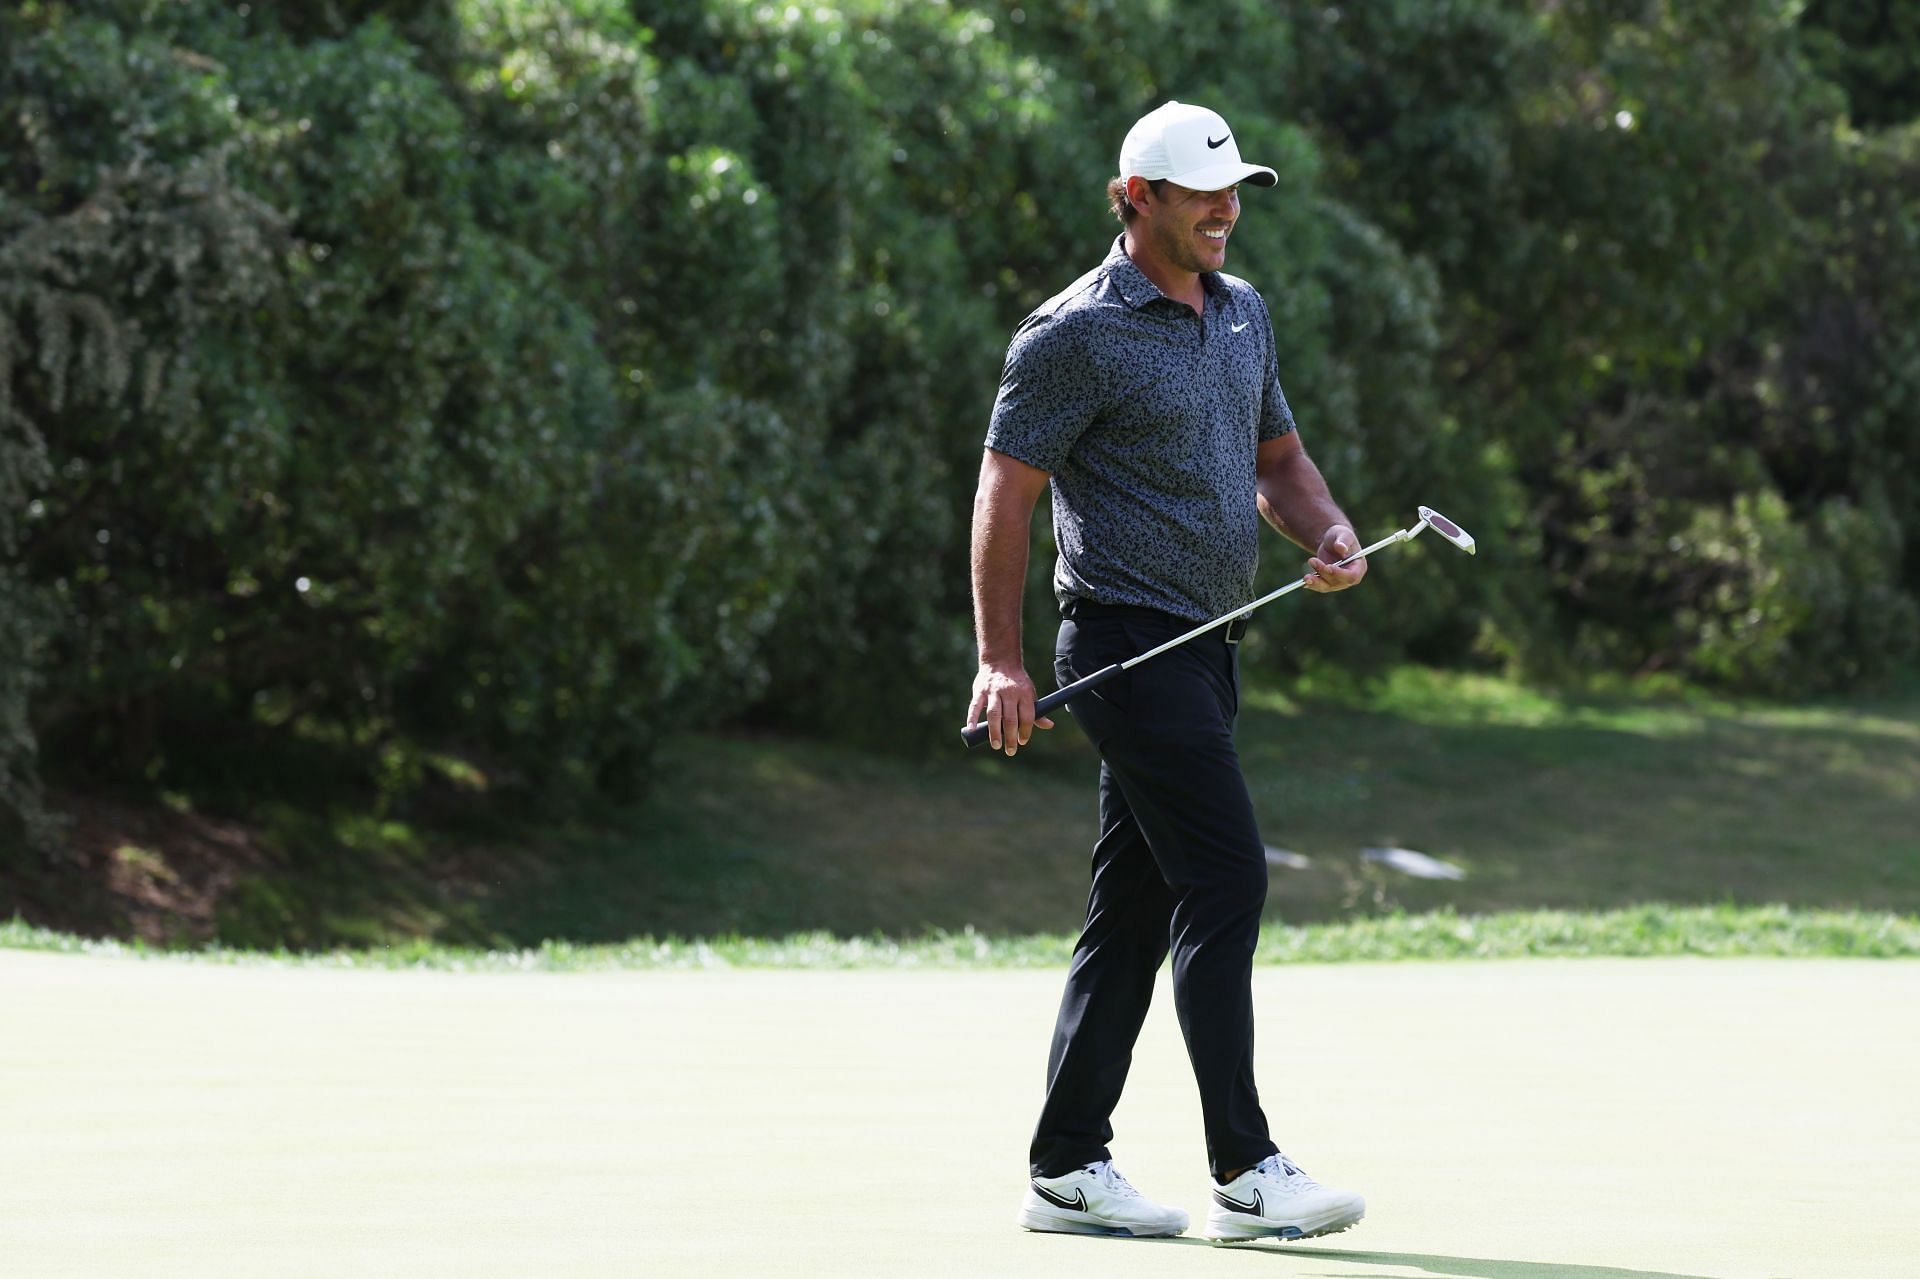 Koepka even had time to joke about his &quot;presence&quot; at the Travelers Championship next week (Image via Getty).